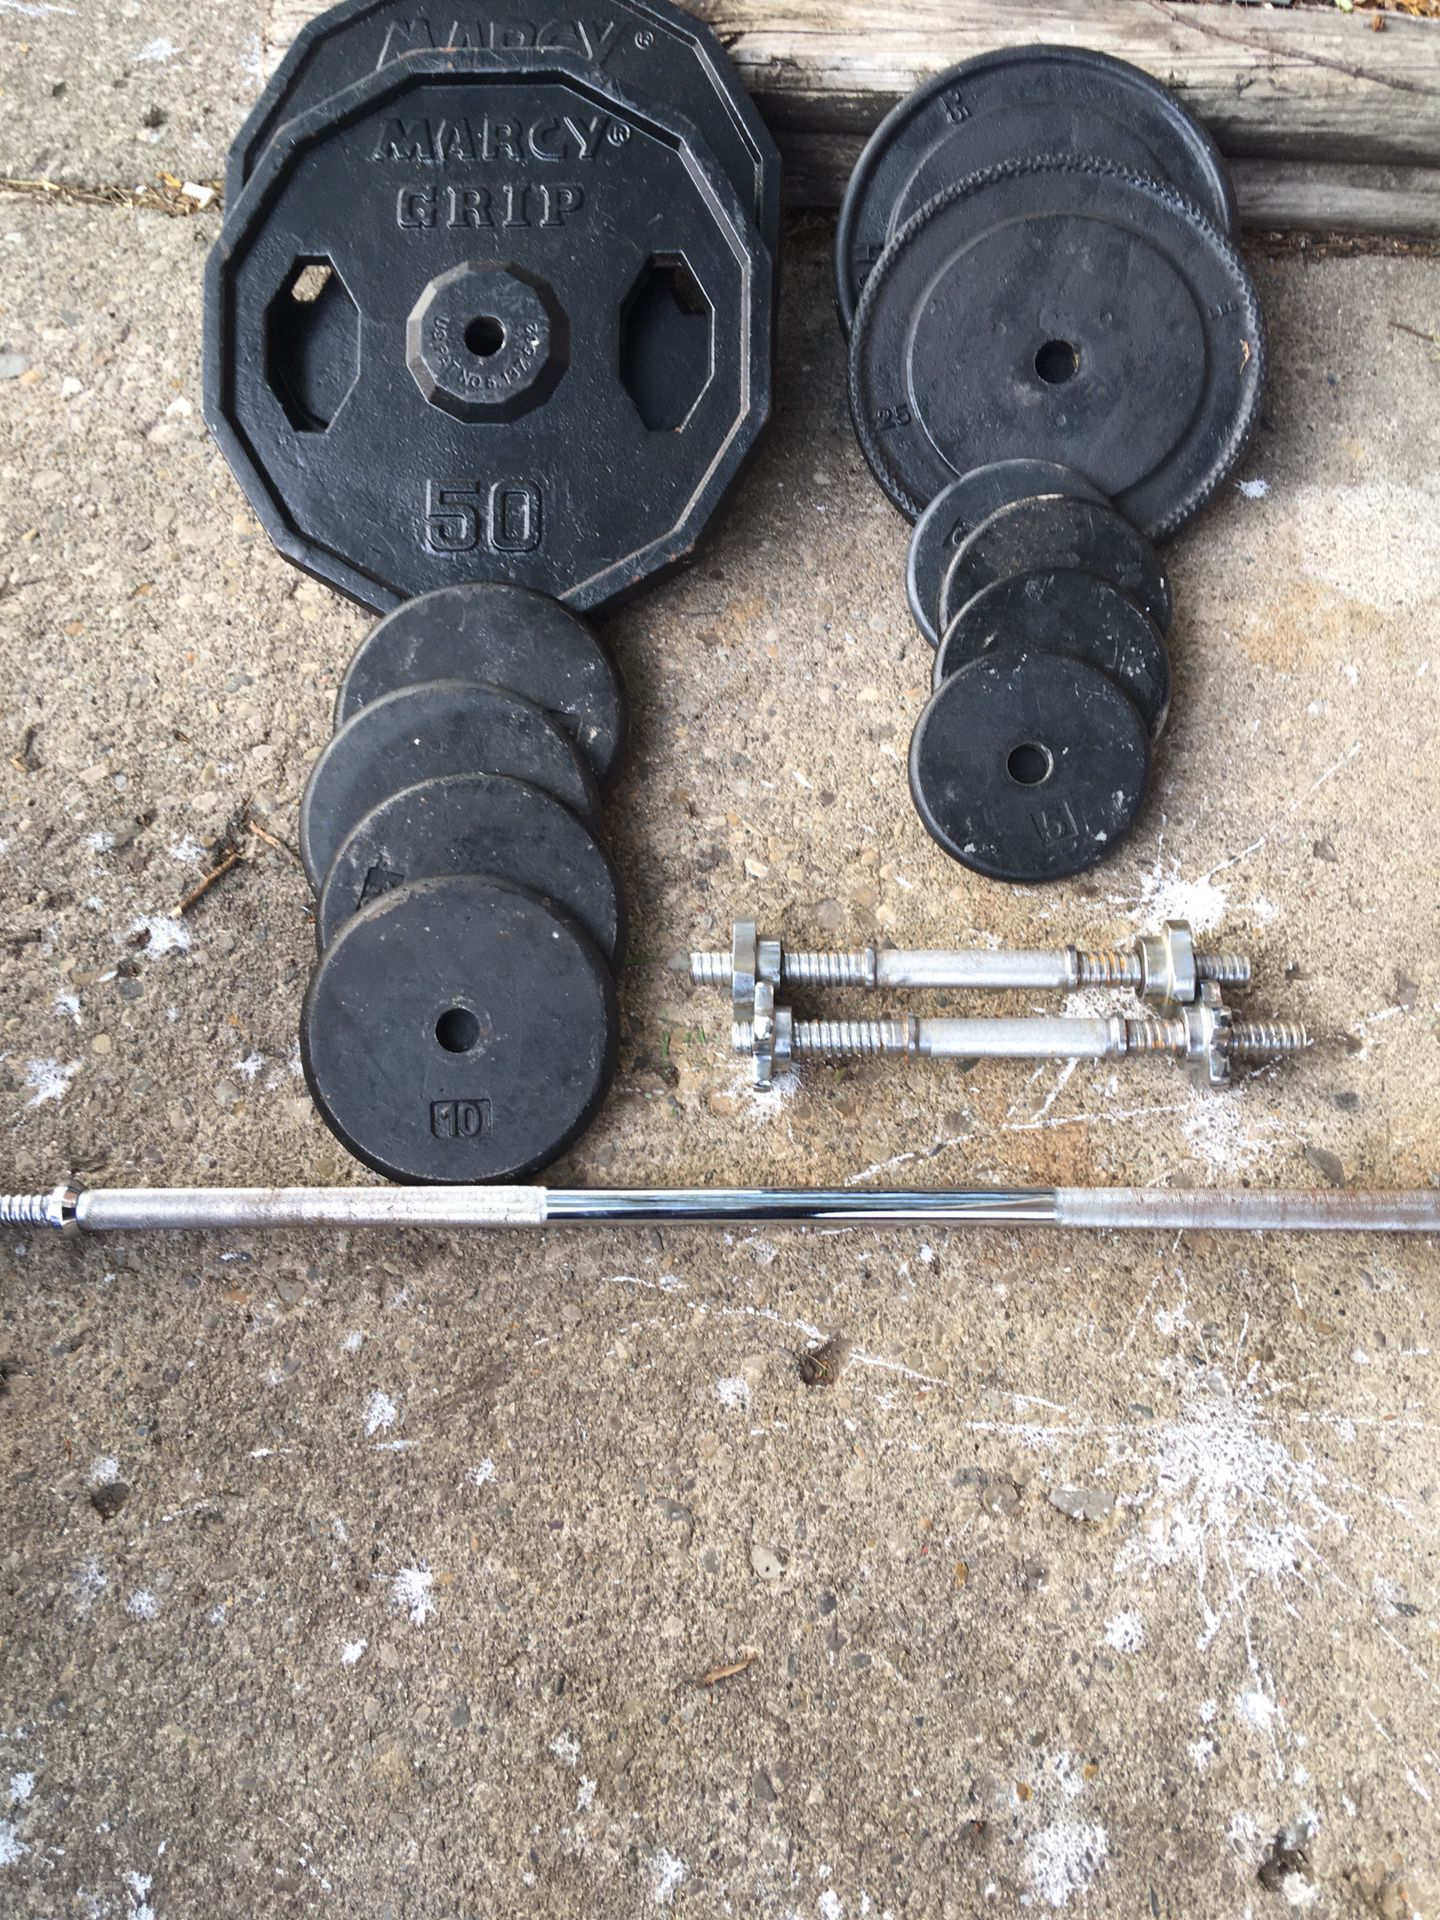 Standard steel weights and bars